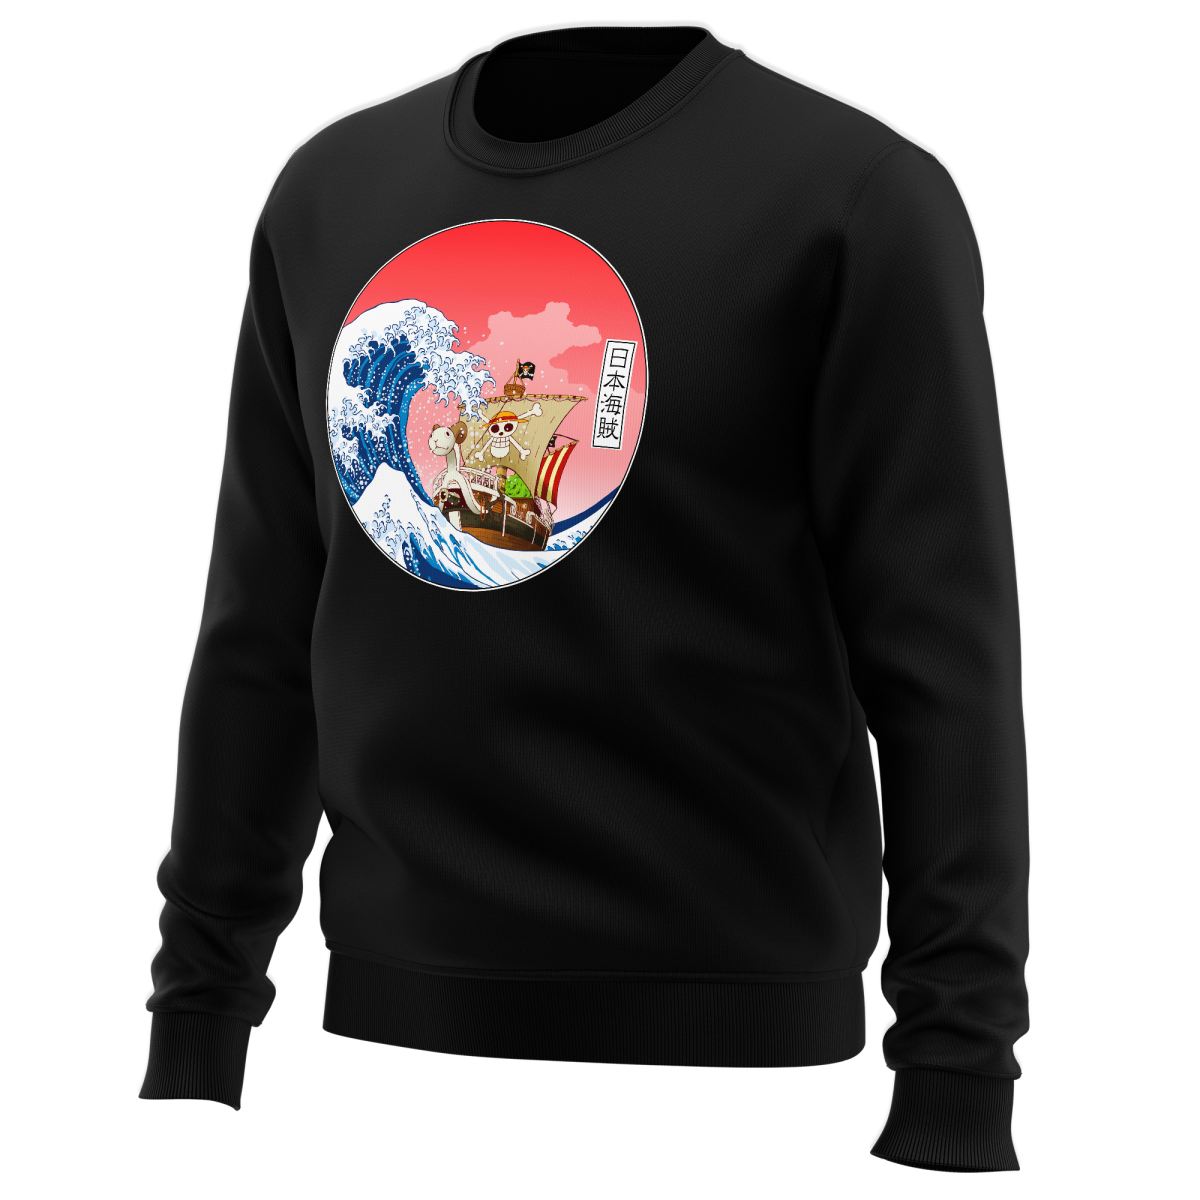 Funny One Piece Sweater Going Merry X The Great Wave Of Kanagawa One Piece Parody Ref 801